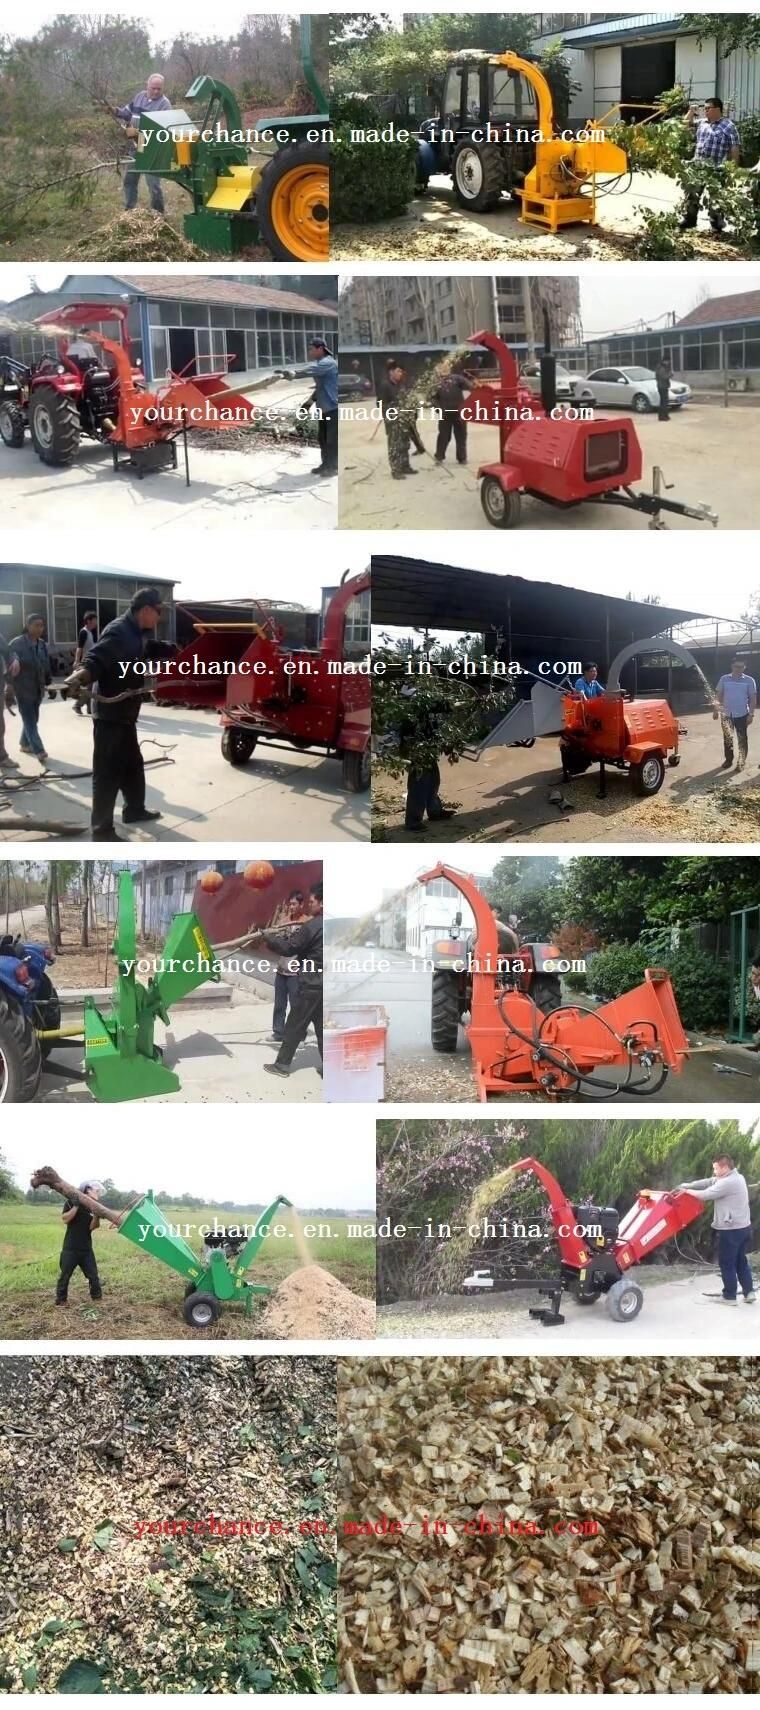 Argentina Hot Sale Wc-22 Towable Selfpower Wood Chipper Tree Branch Shredder Made in China